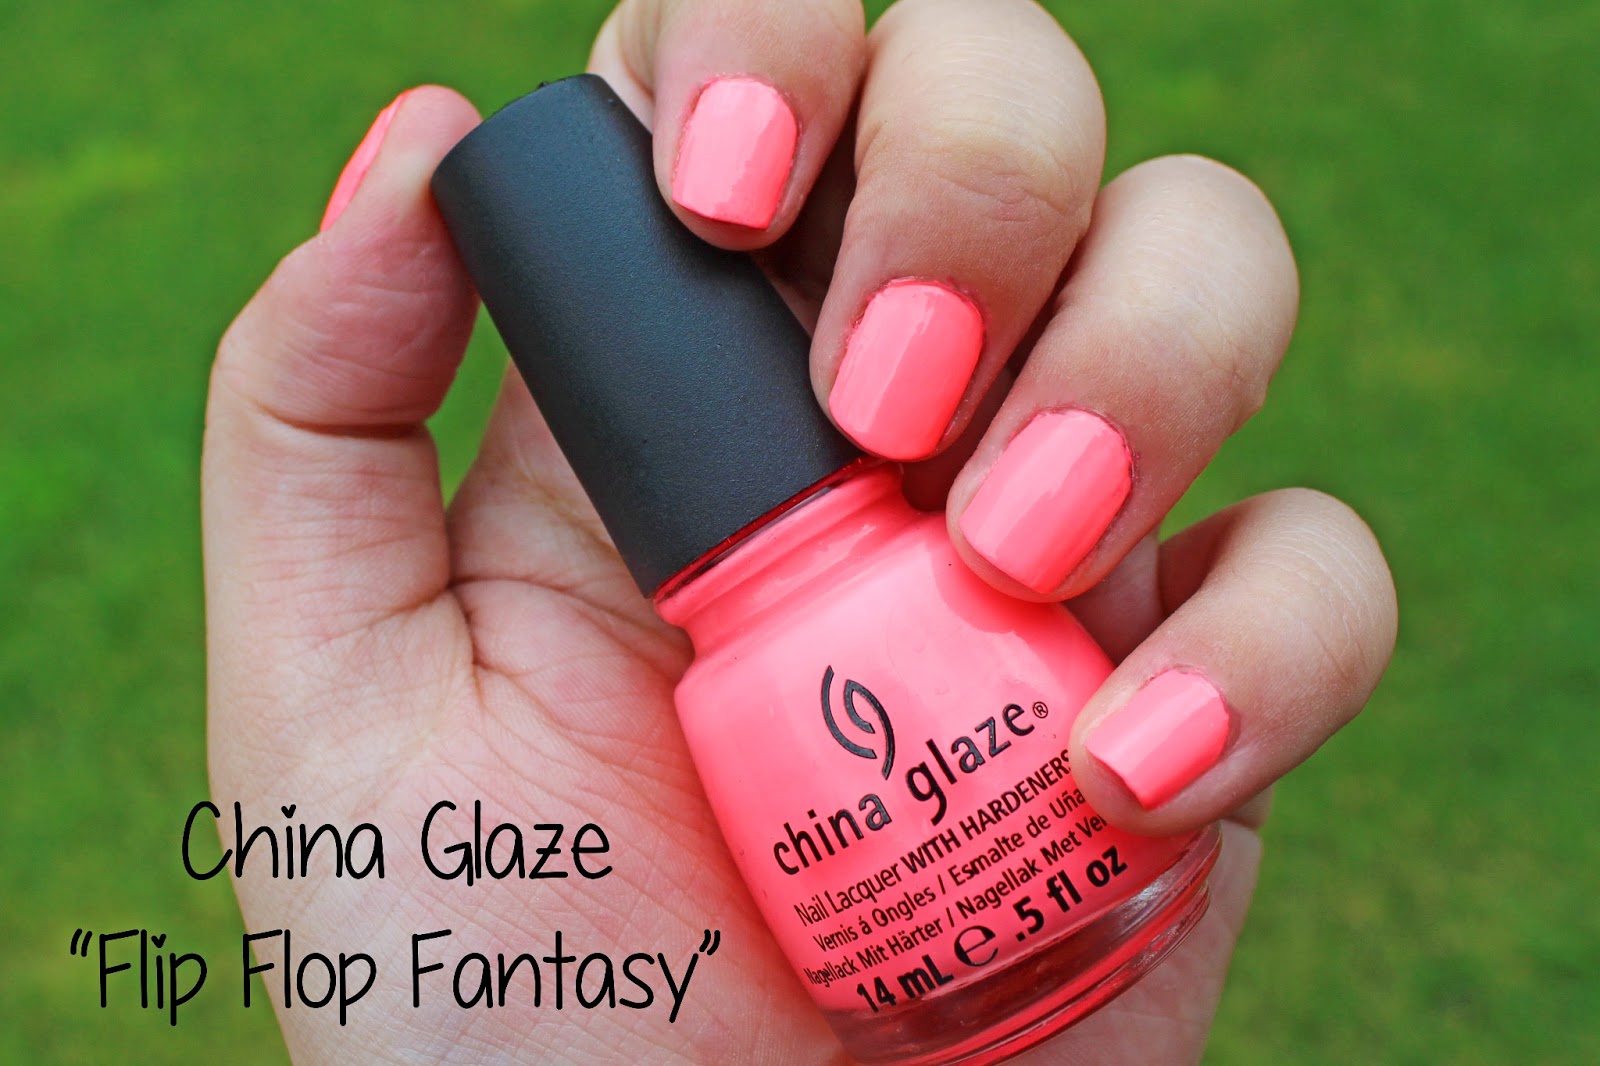 4. China Glaze Nail Lacquer in "Flip Flop Fantasy" - wide 1